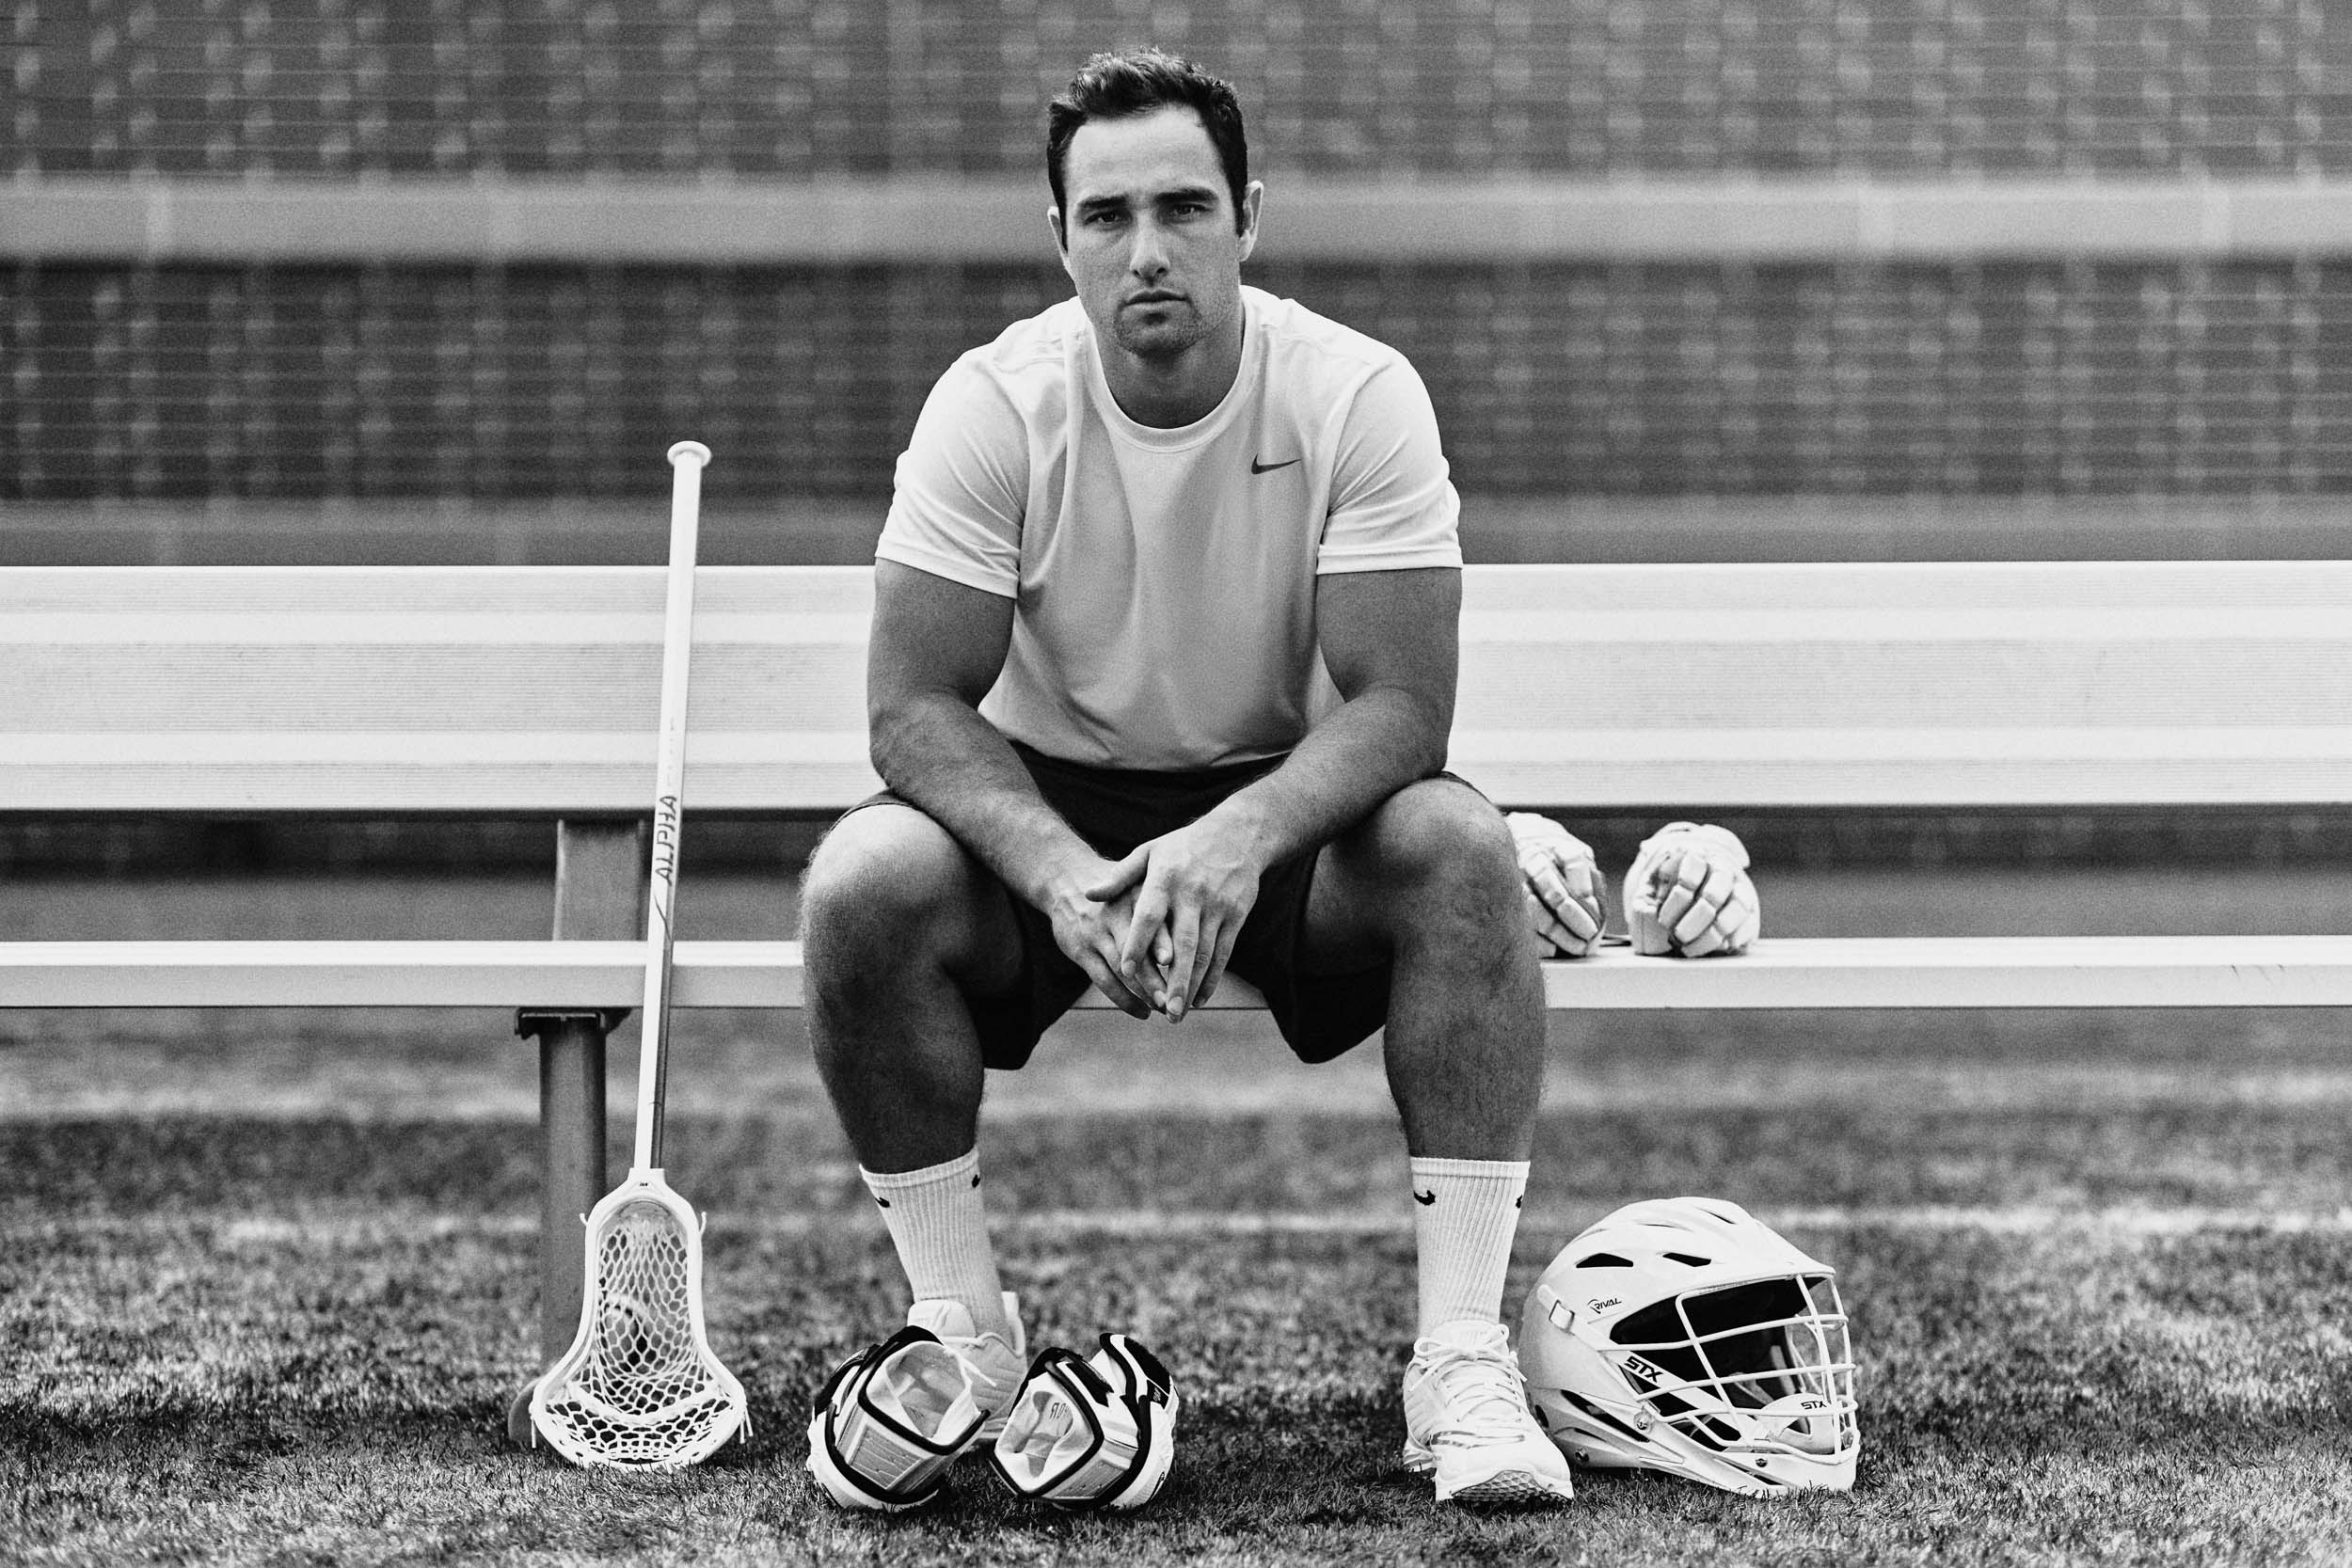 NIKE COMMERCIAL SPORTS ADVERTISING CAMPAIGN PHOTOGRAPHER NEAR LOS ANGELES NEW YORK NIKE GLOBAL BRAND PHOTOGRAPHY FEATURING STX LACROSSE